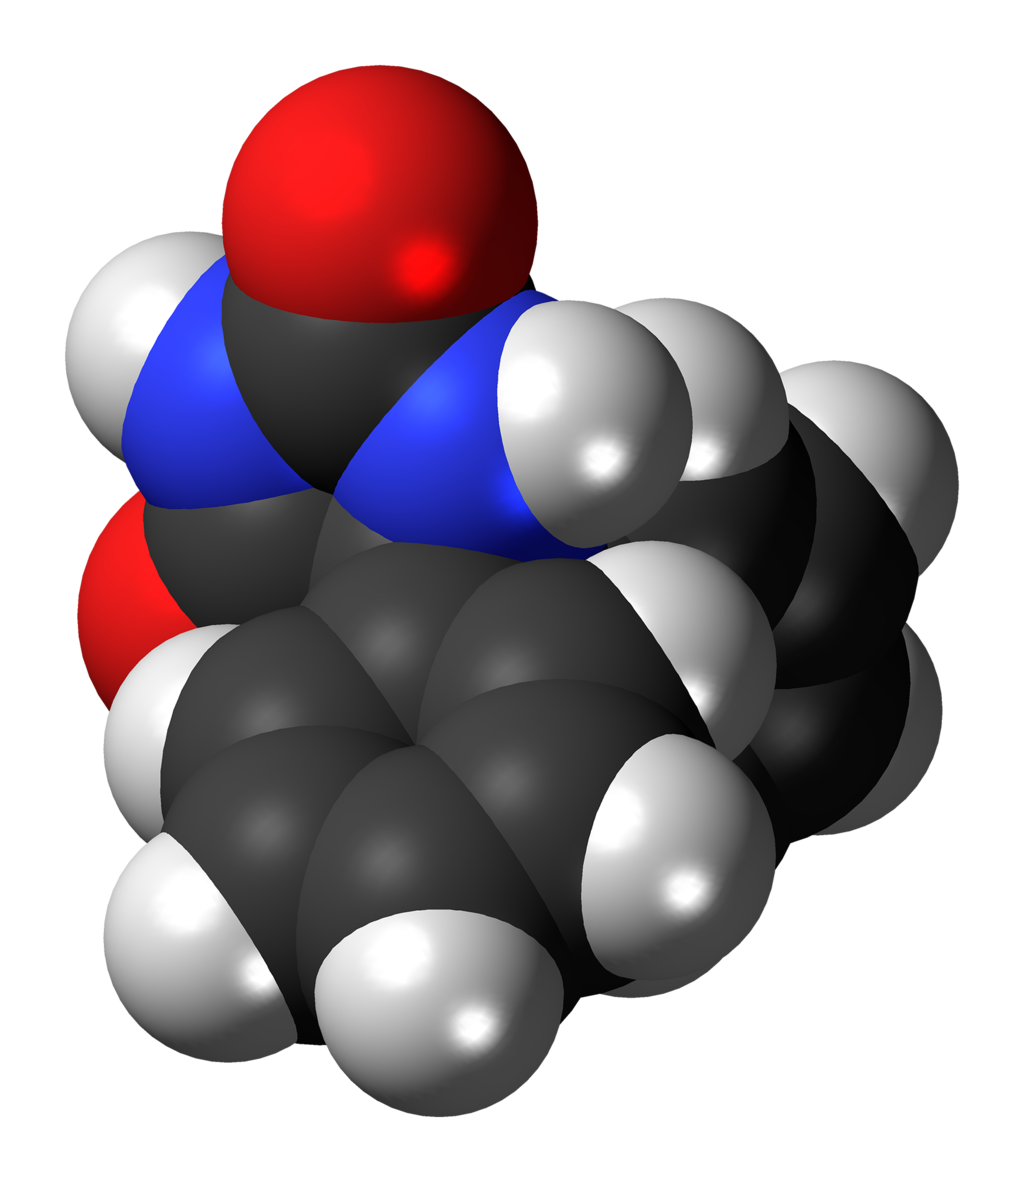 File:Phenytoin 3D spacefill.png